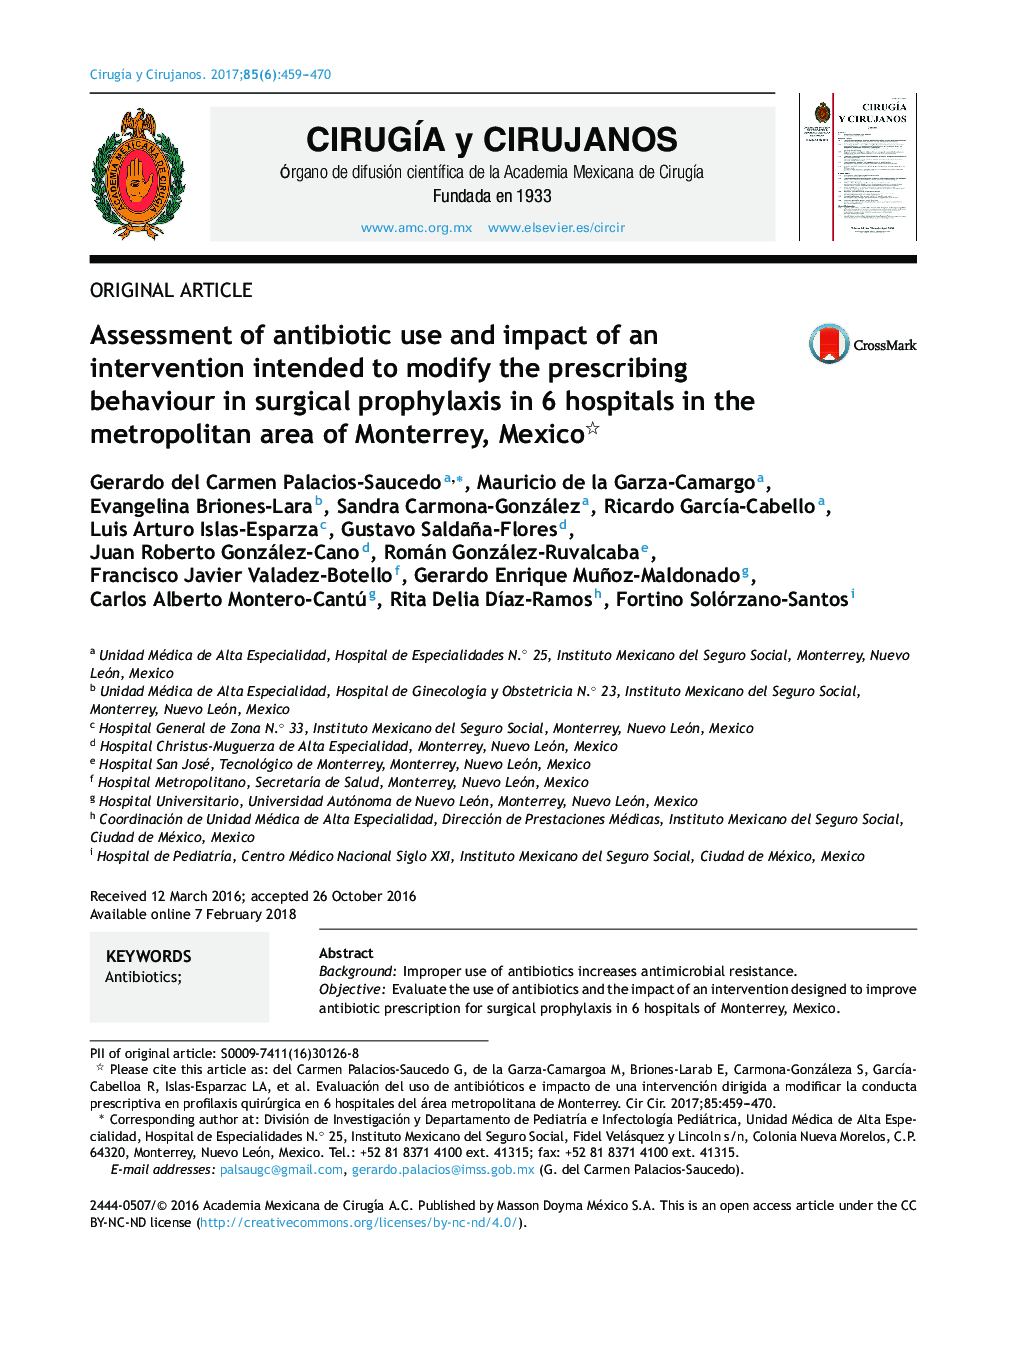 Assessment of antibiotic use and impact of an intervention intended to modify the prescribing behaviour in surgical prophylaxis in 6 hospitals in the metropolitan area of Monterrey, Mexico